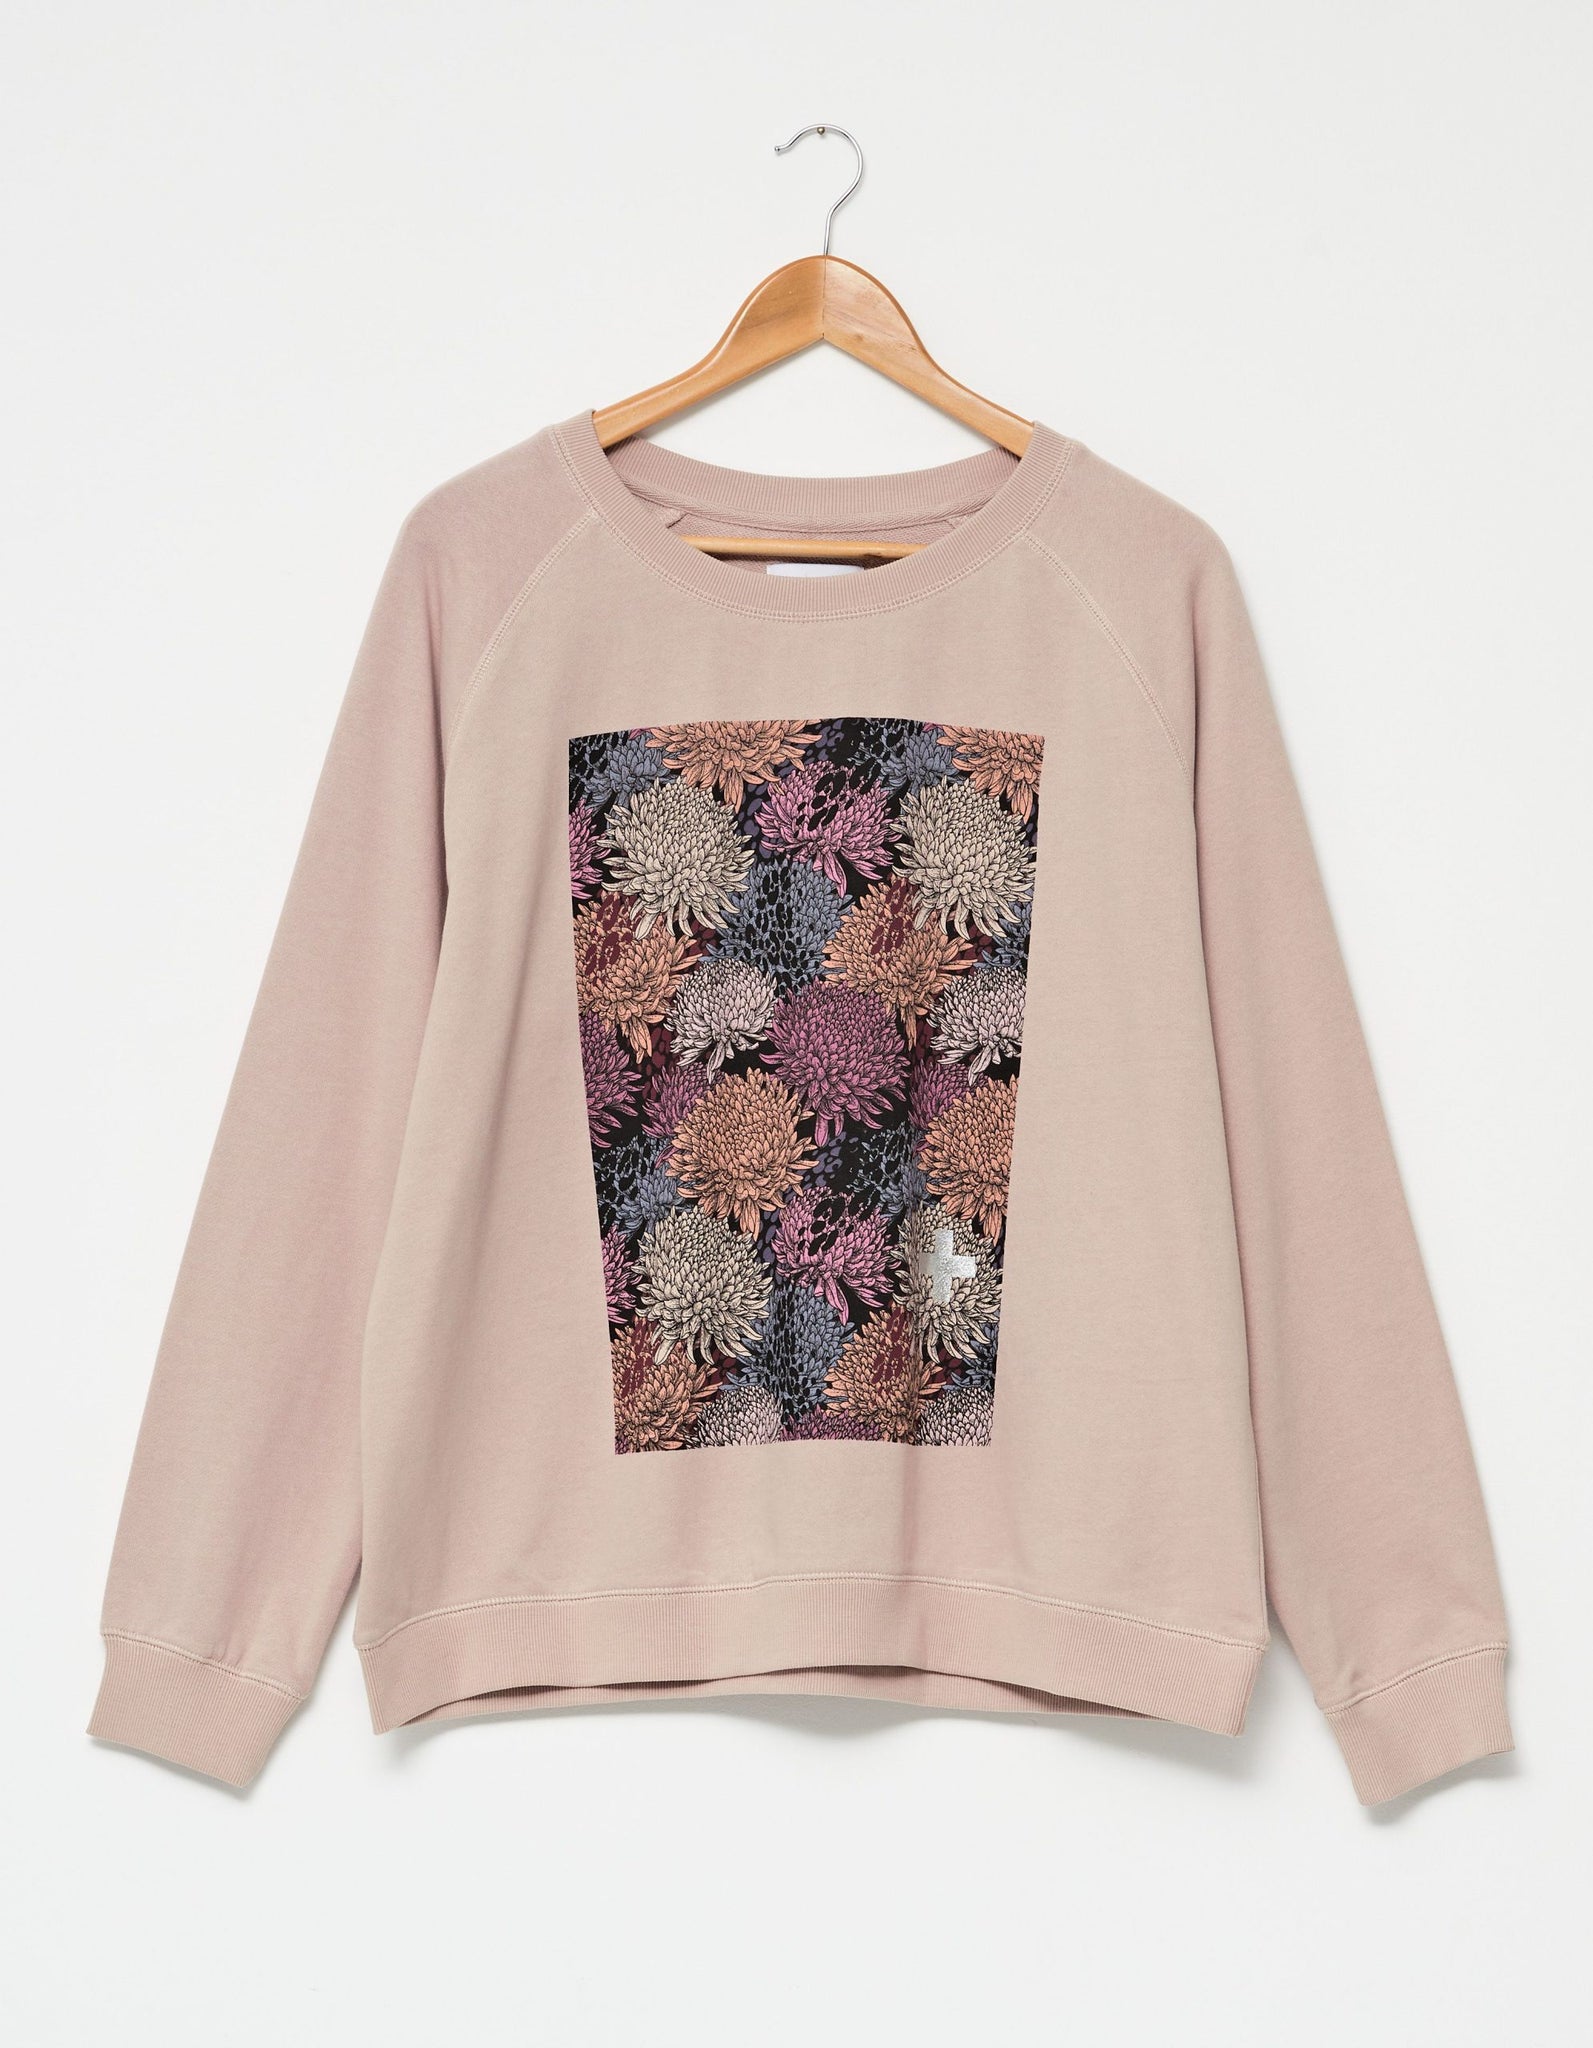 SGSW8055 Floral Square Sweater by Stella and Gemma